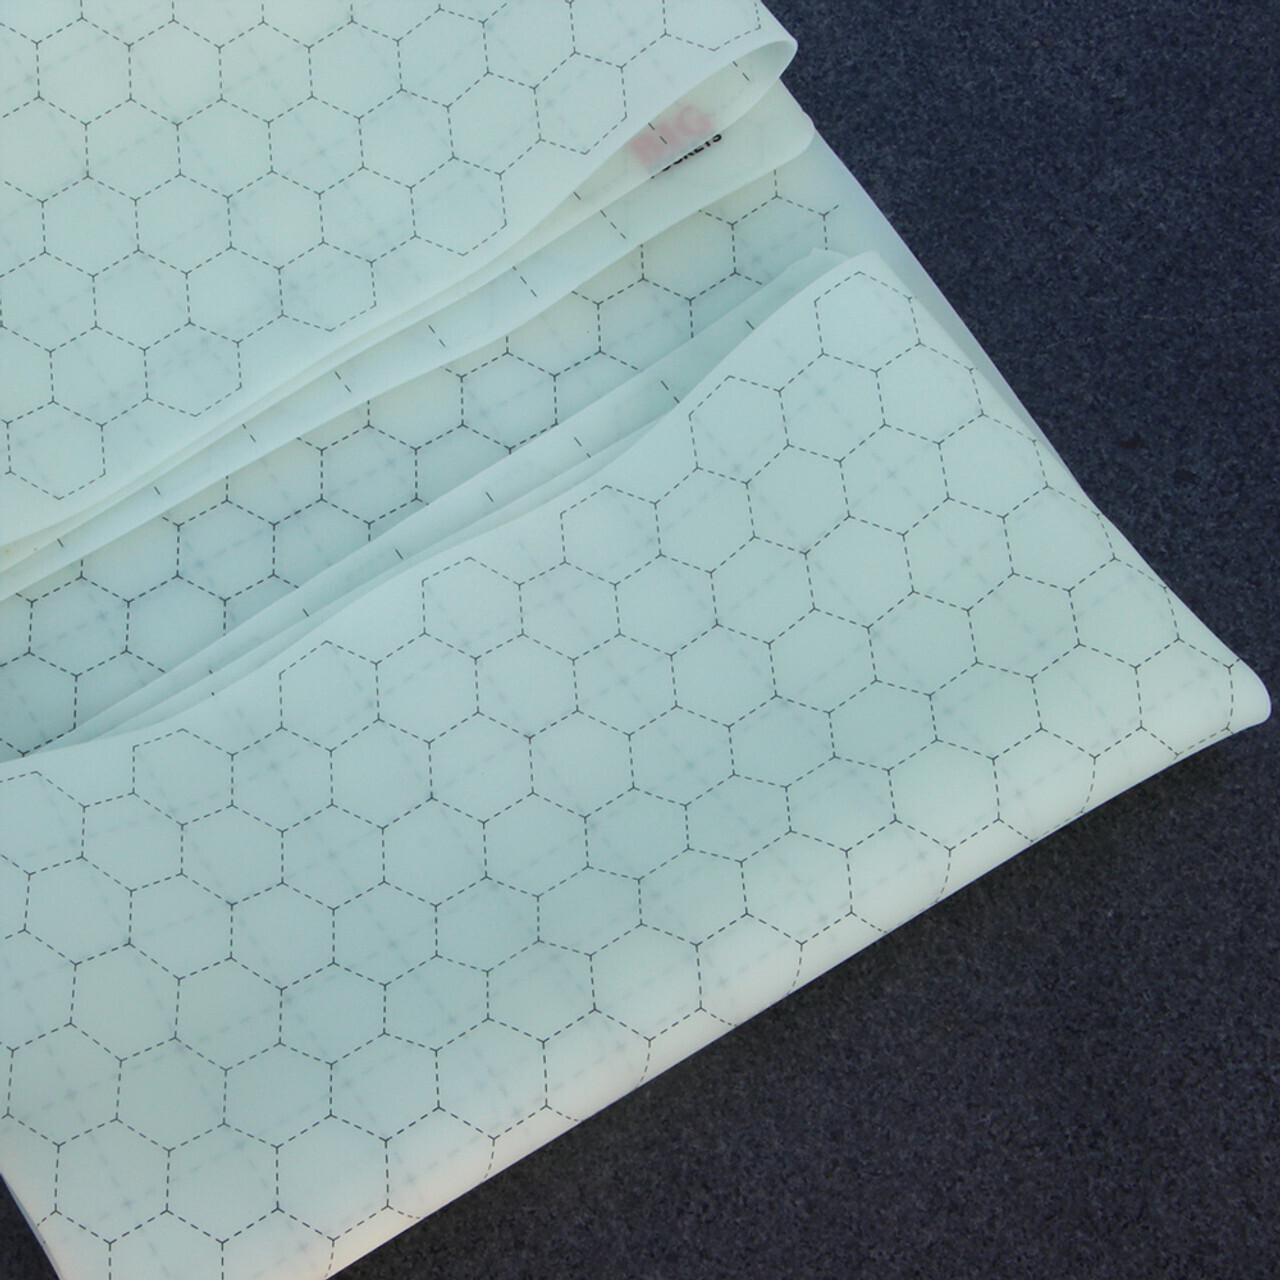 Big Silicone Battle Mat for RPG - Spielmatte - Weiss - Hex and Square - BIG POCKETS